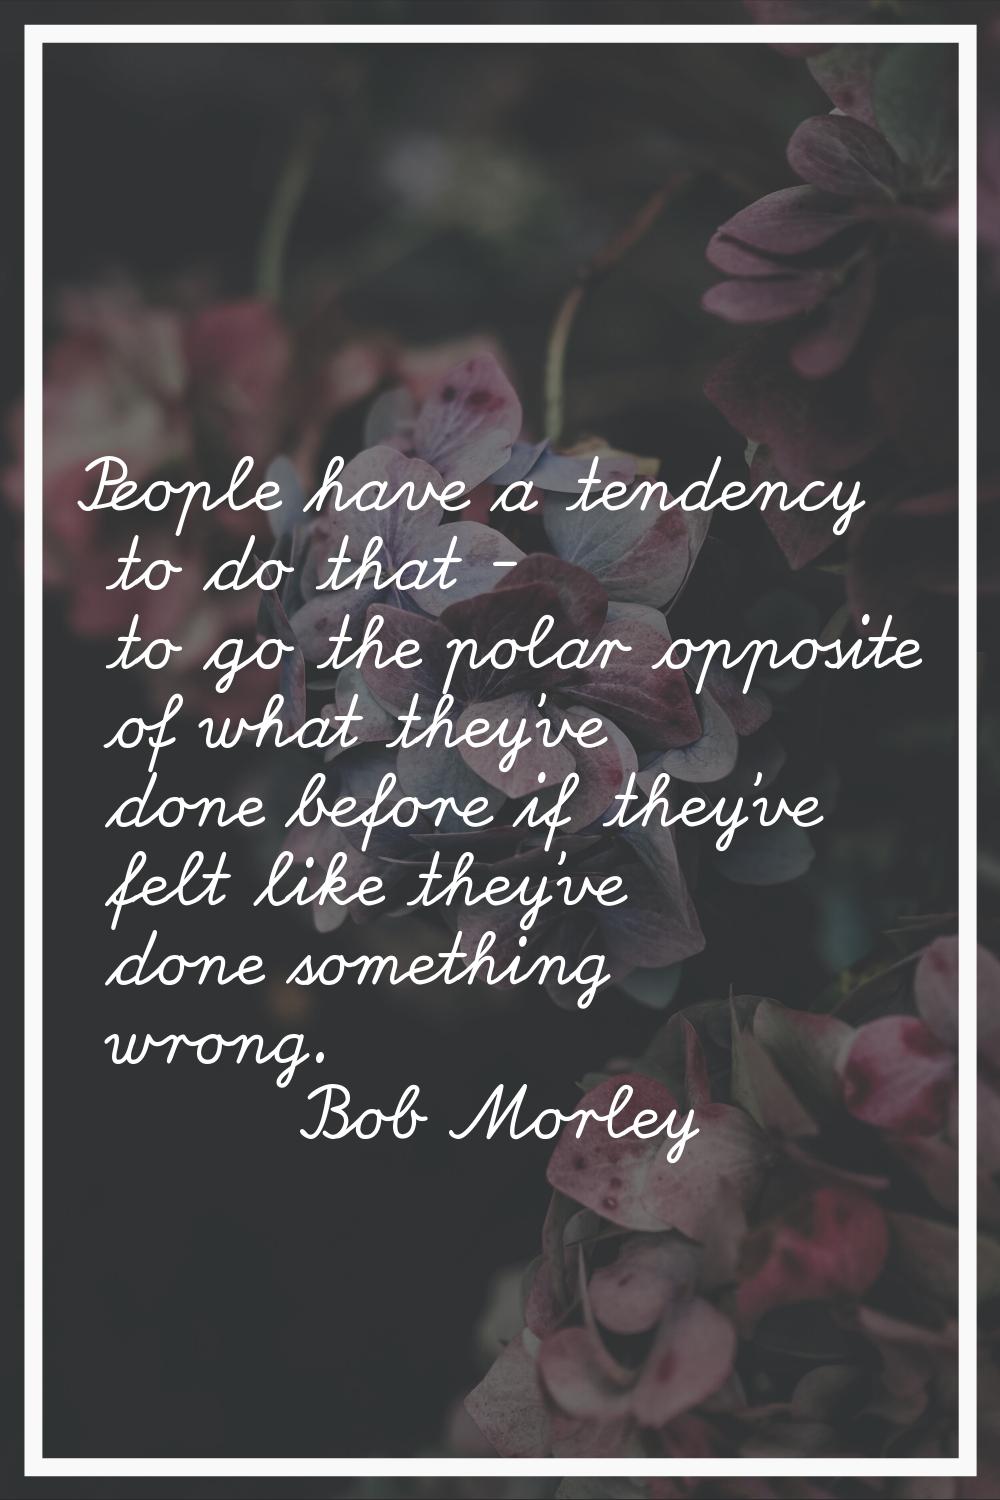 People have a tendency to do that - to go the polar opposite of what they've done before if they've